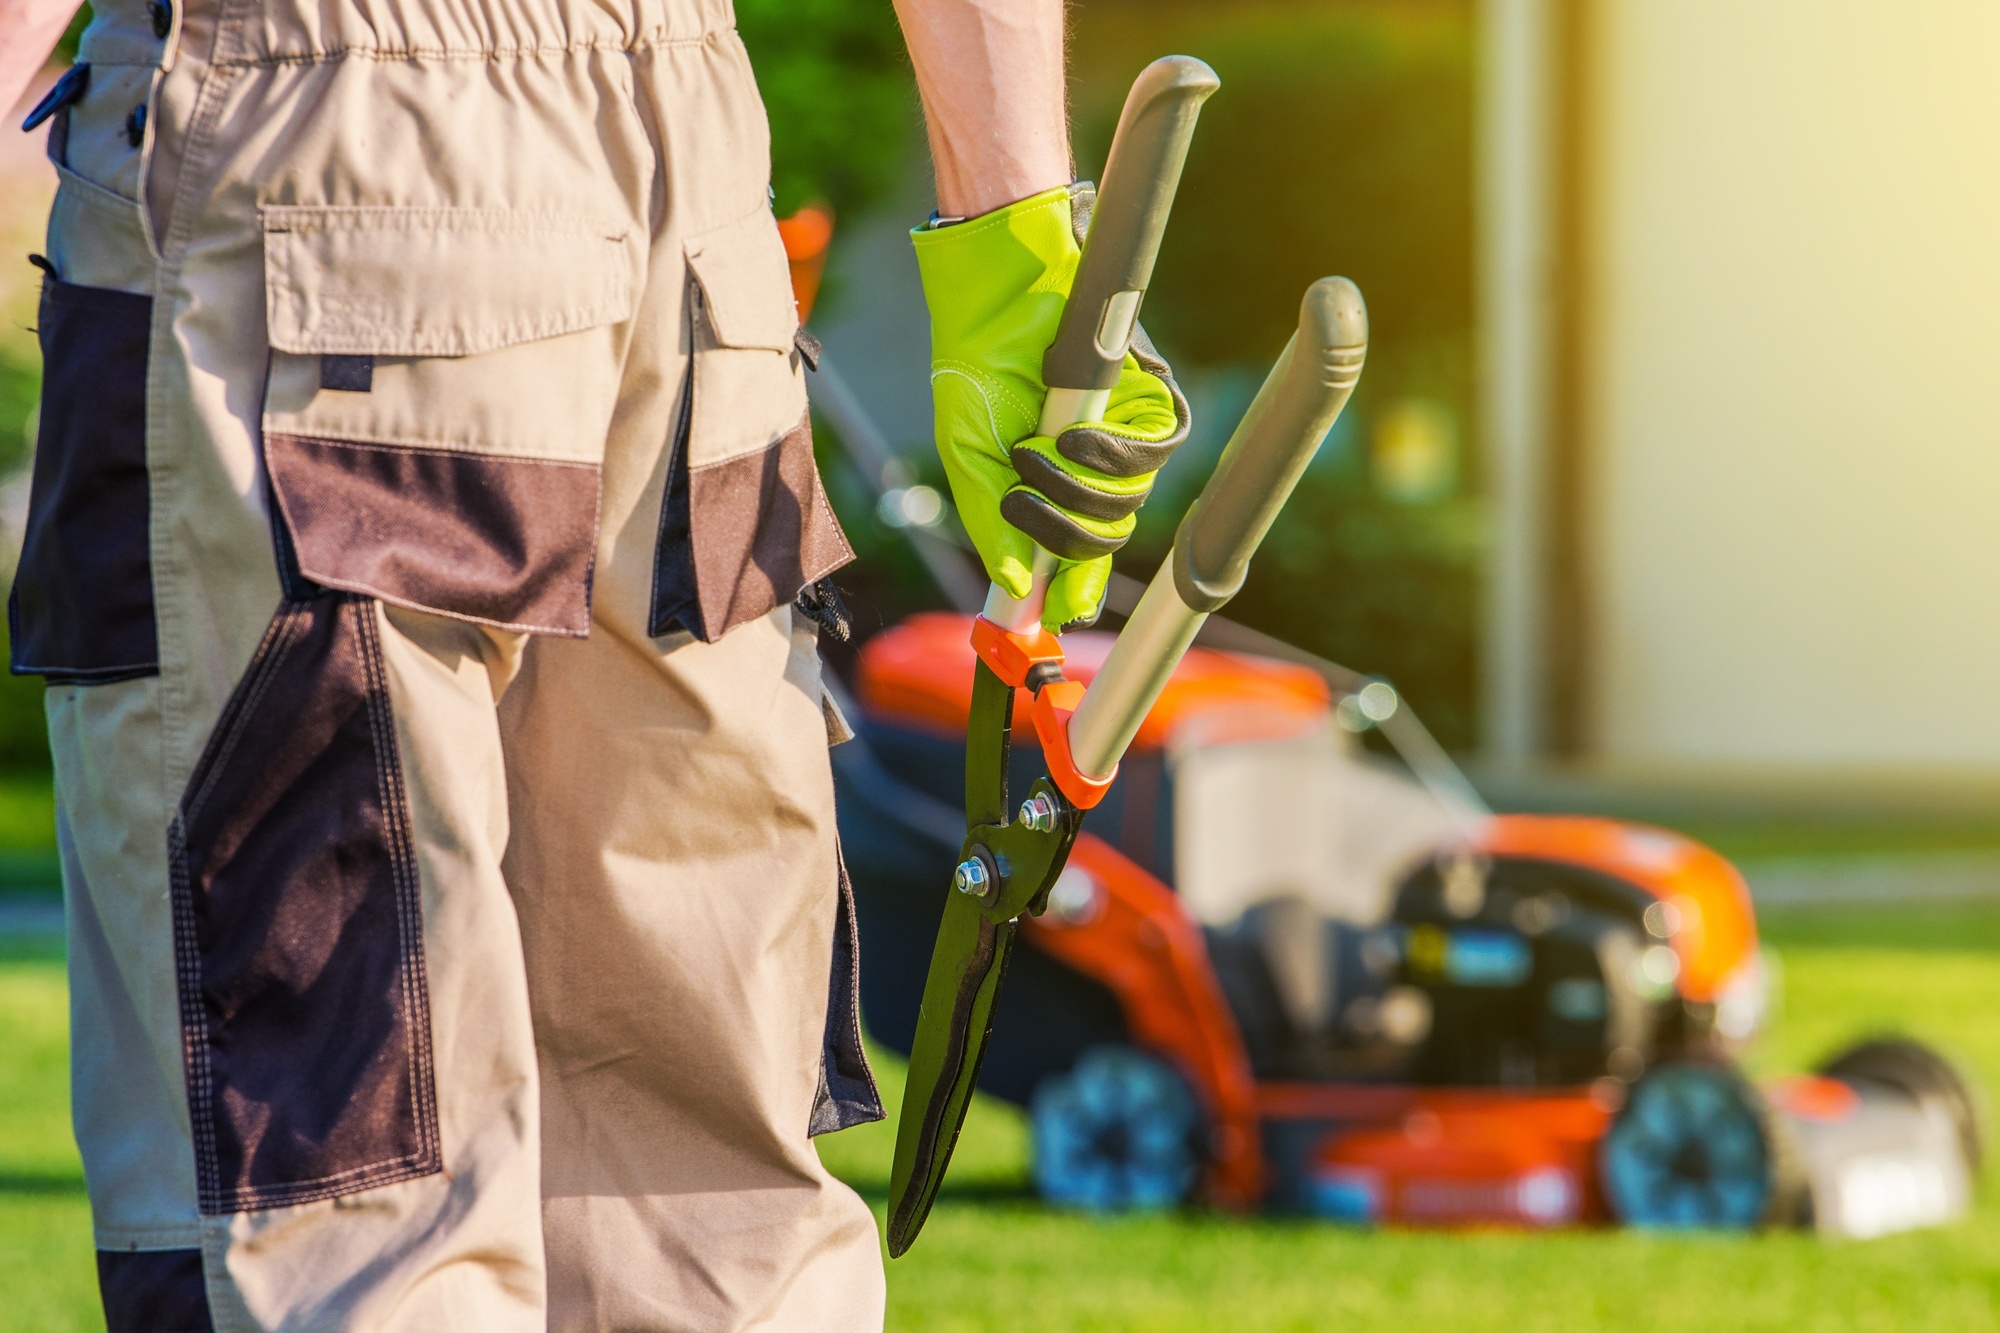 Regular garden maintenance can keep your outdoor living space organized, tidy and looking wonderful. See our tips about maintaining your outdoor living today.